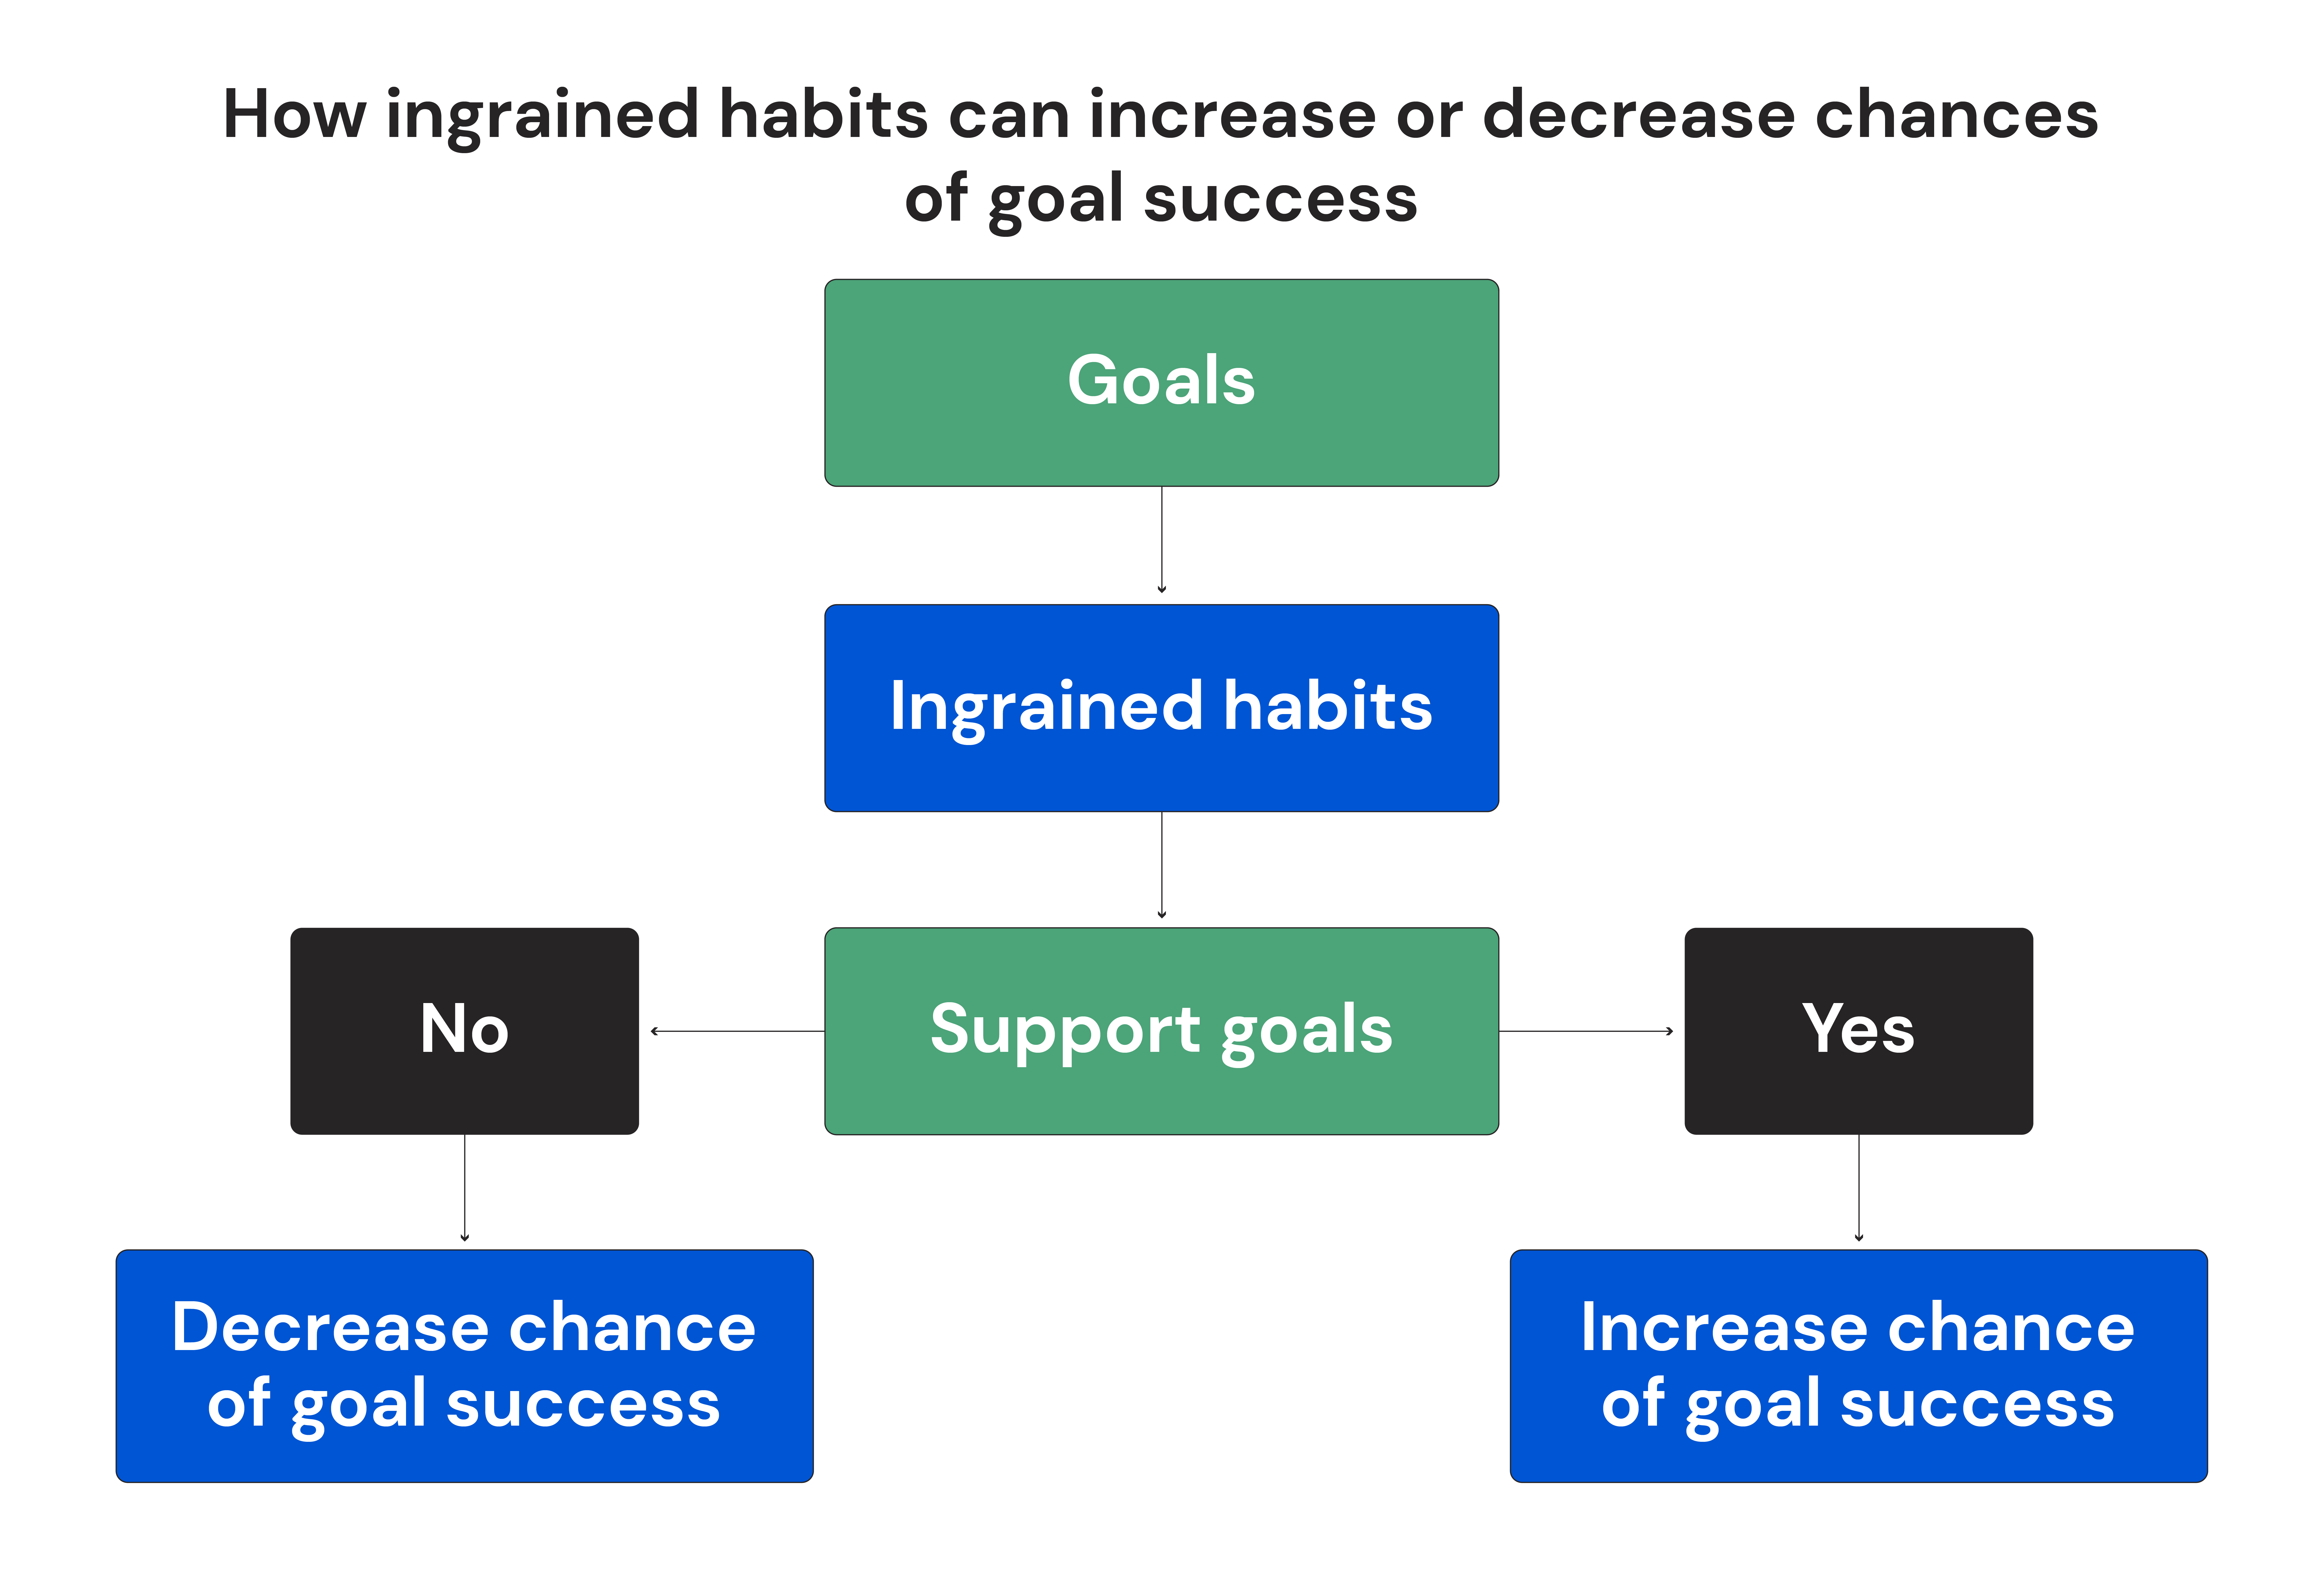 How ingrained habits can increase or decrease chances of goal success